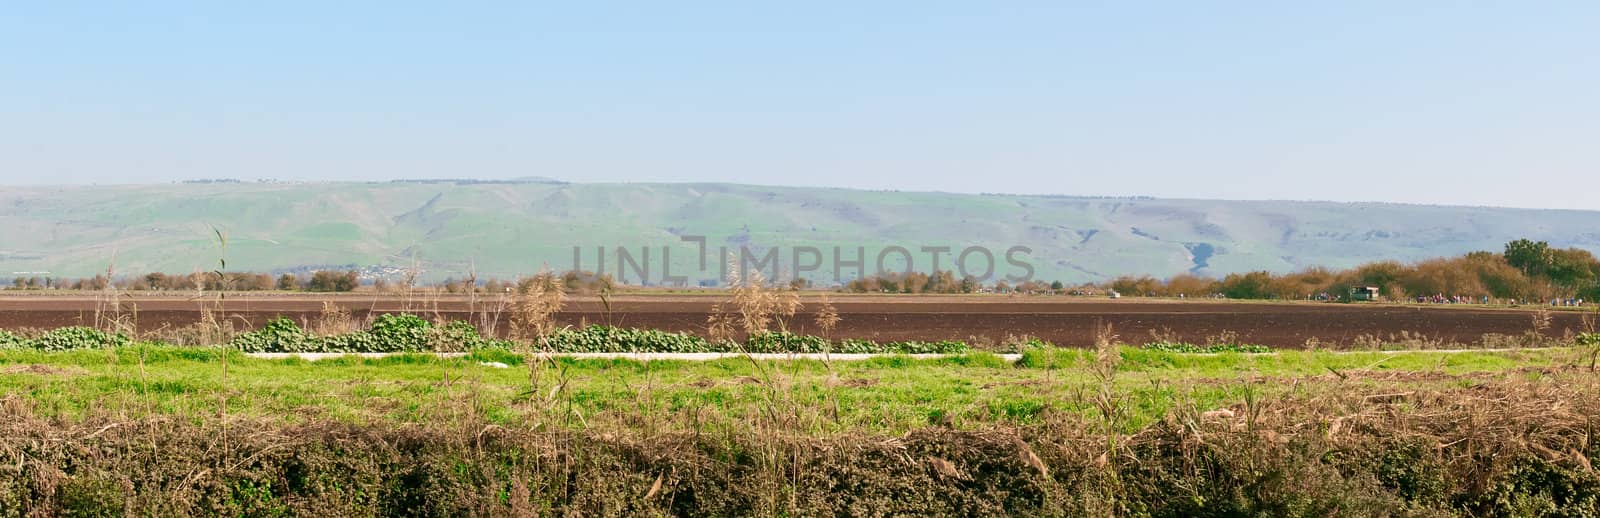 Landscape of the Upper Galilee.  Israel. by LarisaP